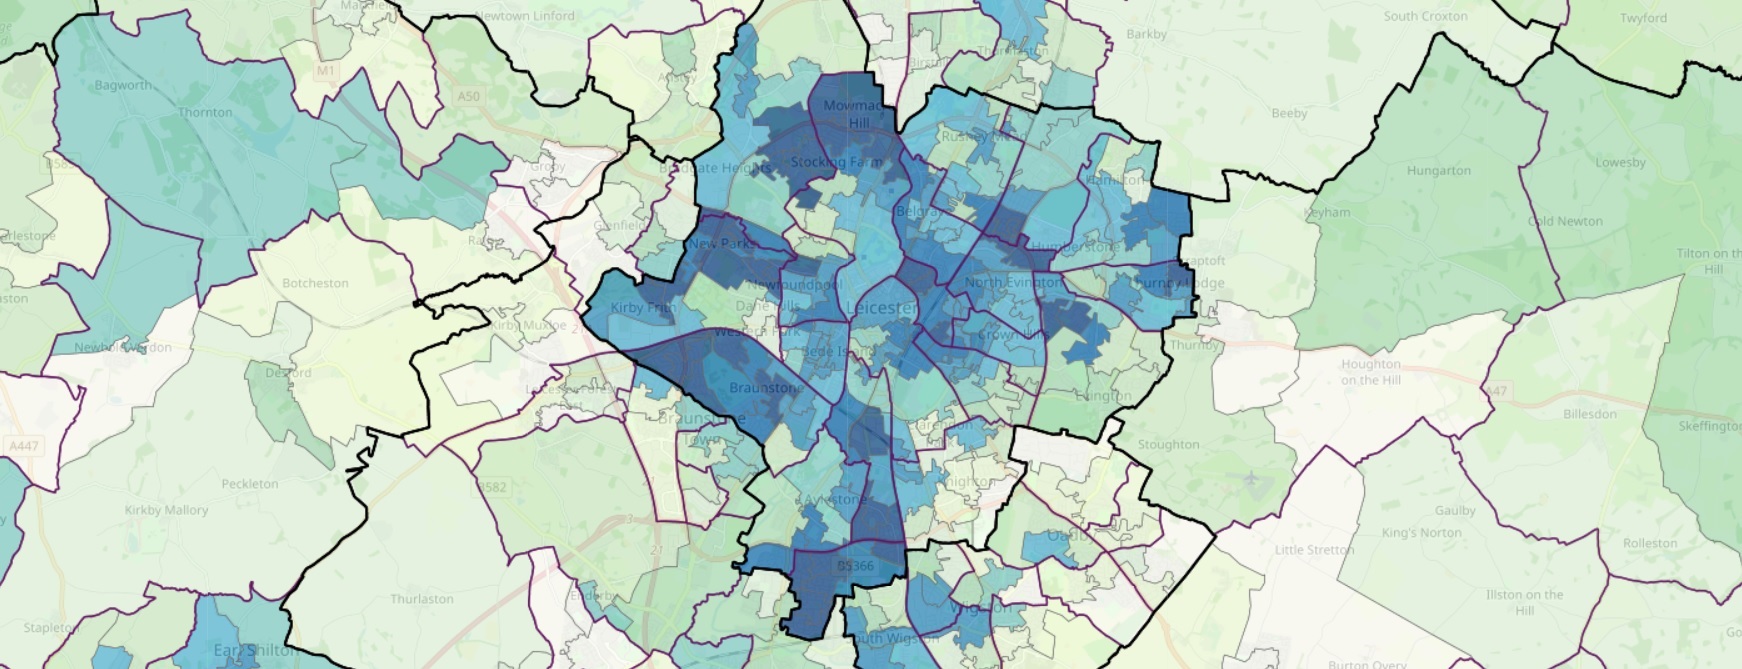 Income, Skills and Deprivation in Leicester and Nottingham